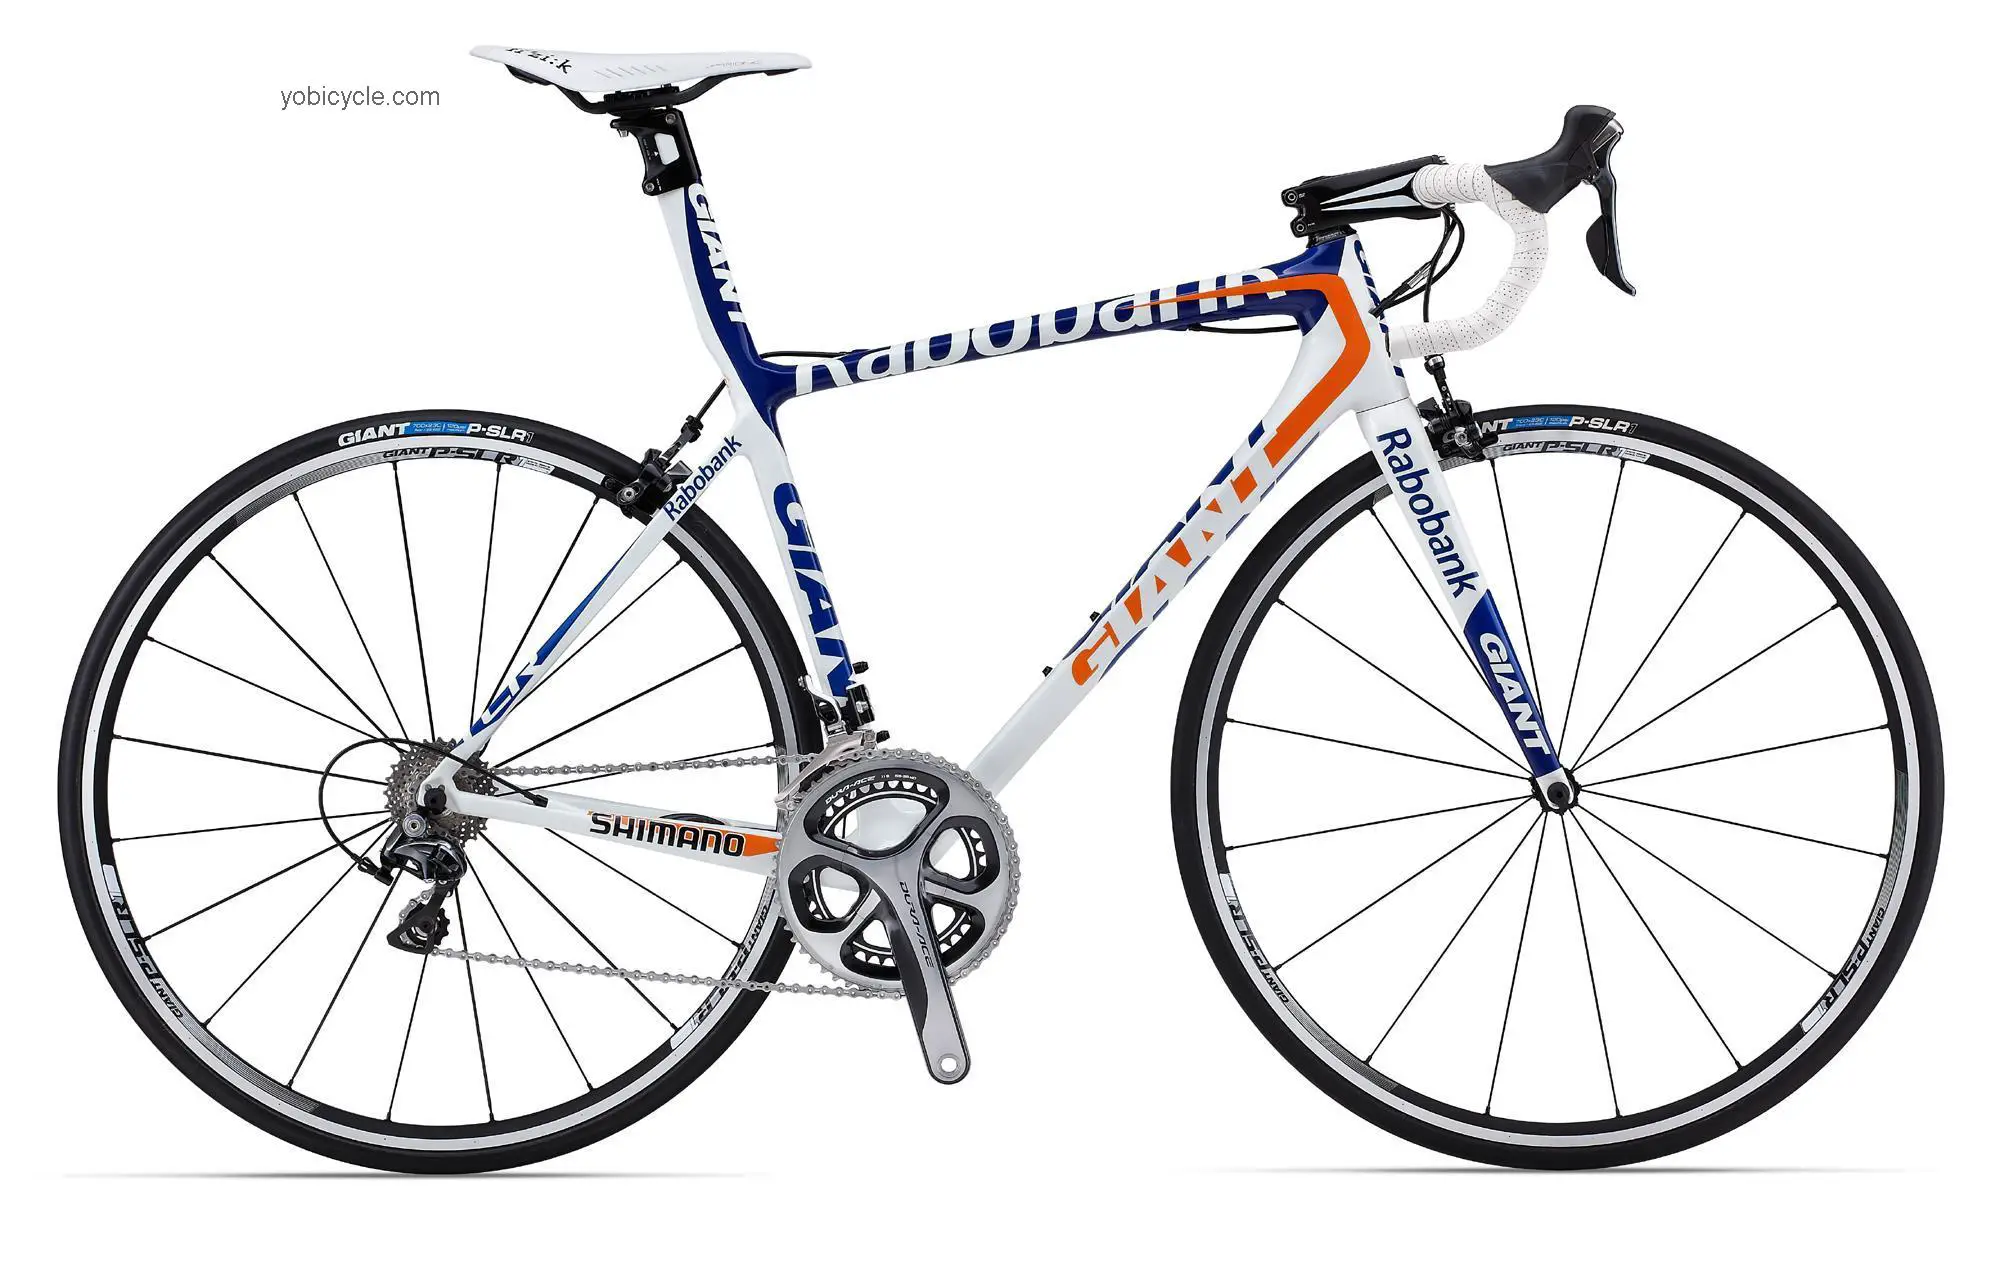 Giant TCR Advanced SL Rabo 2013 comparison online with competitors